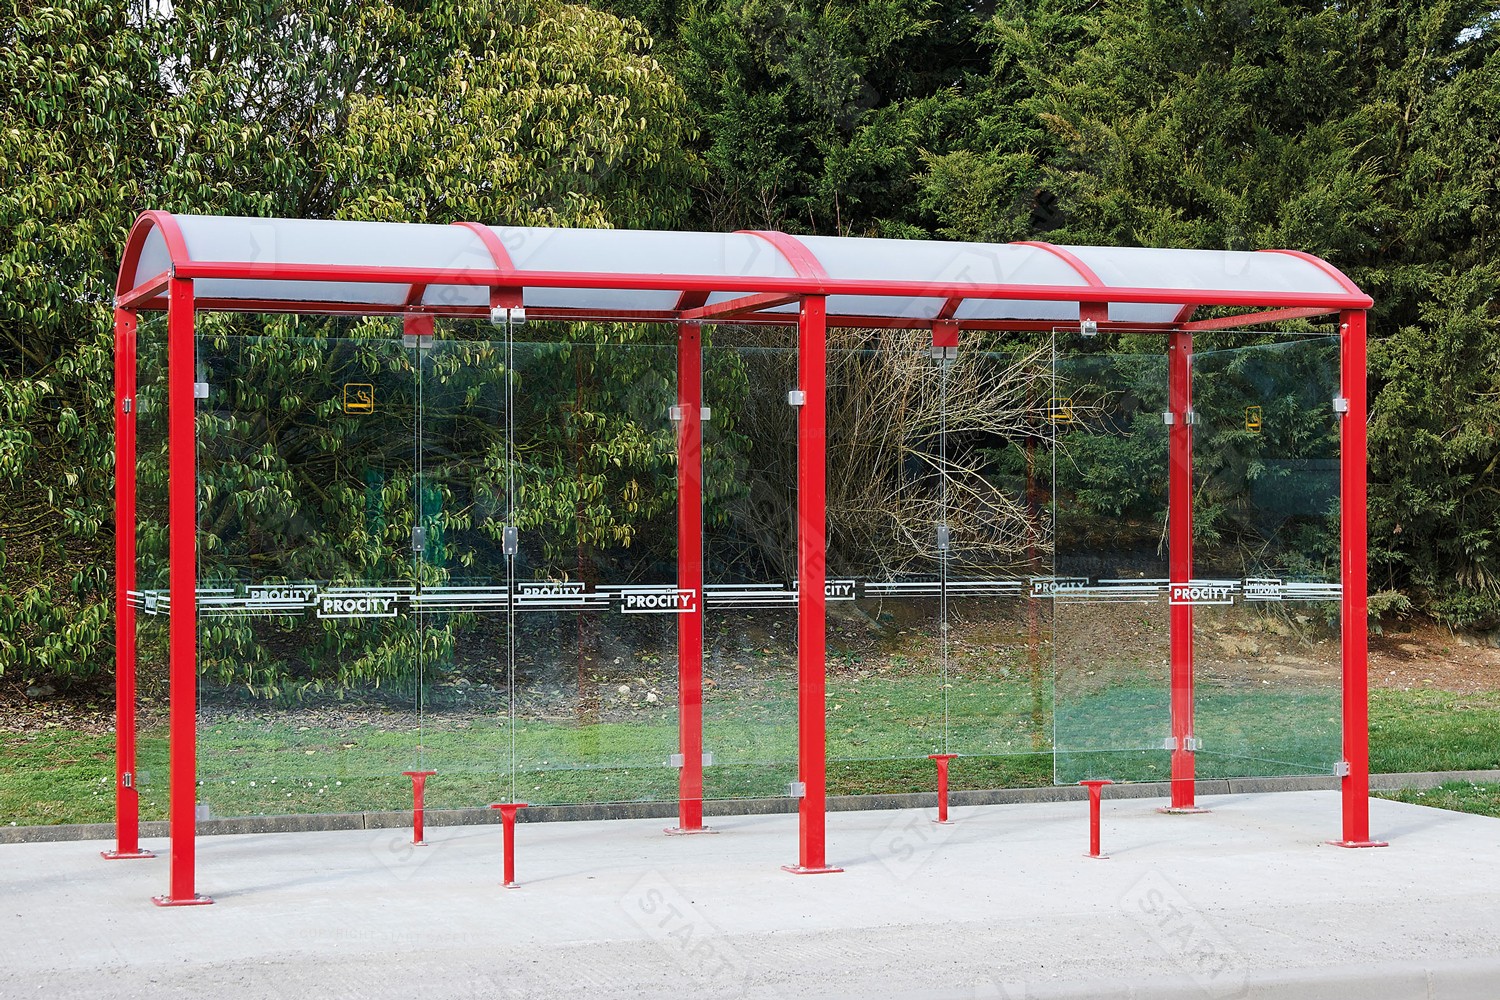 Procity Voute M Smoking Shelter Installed